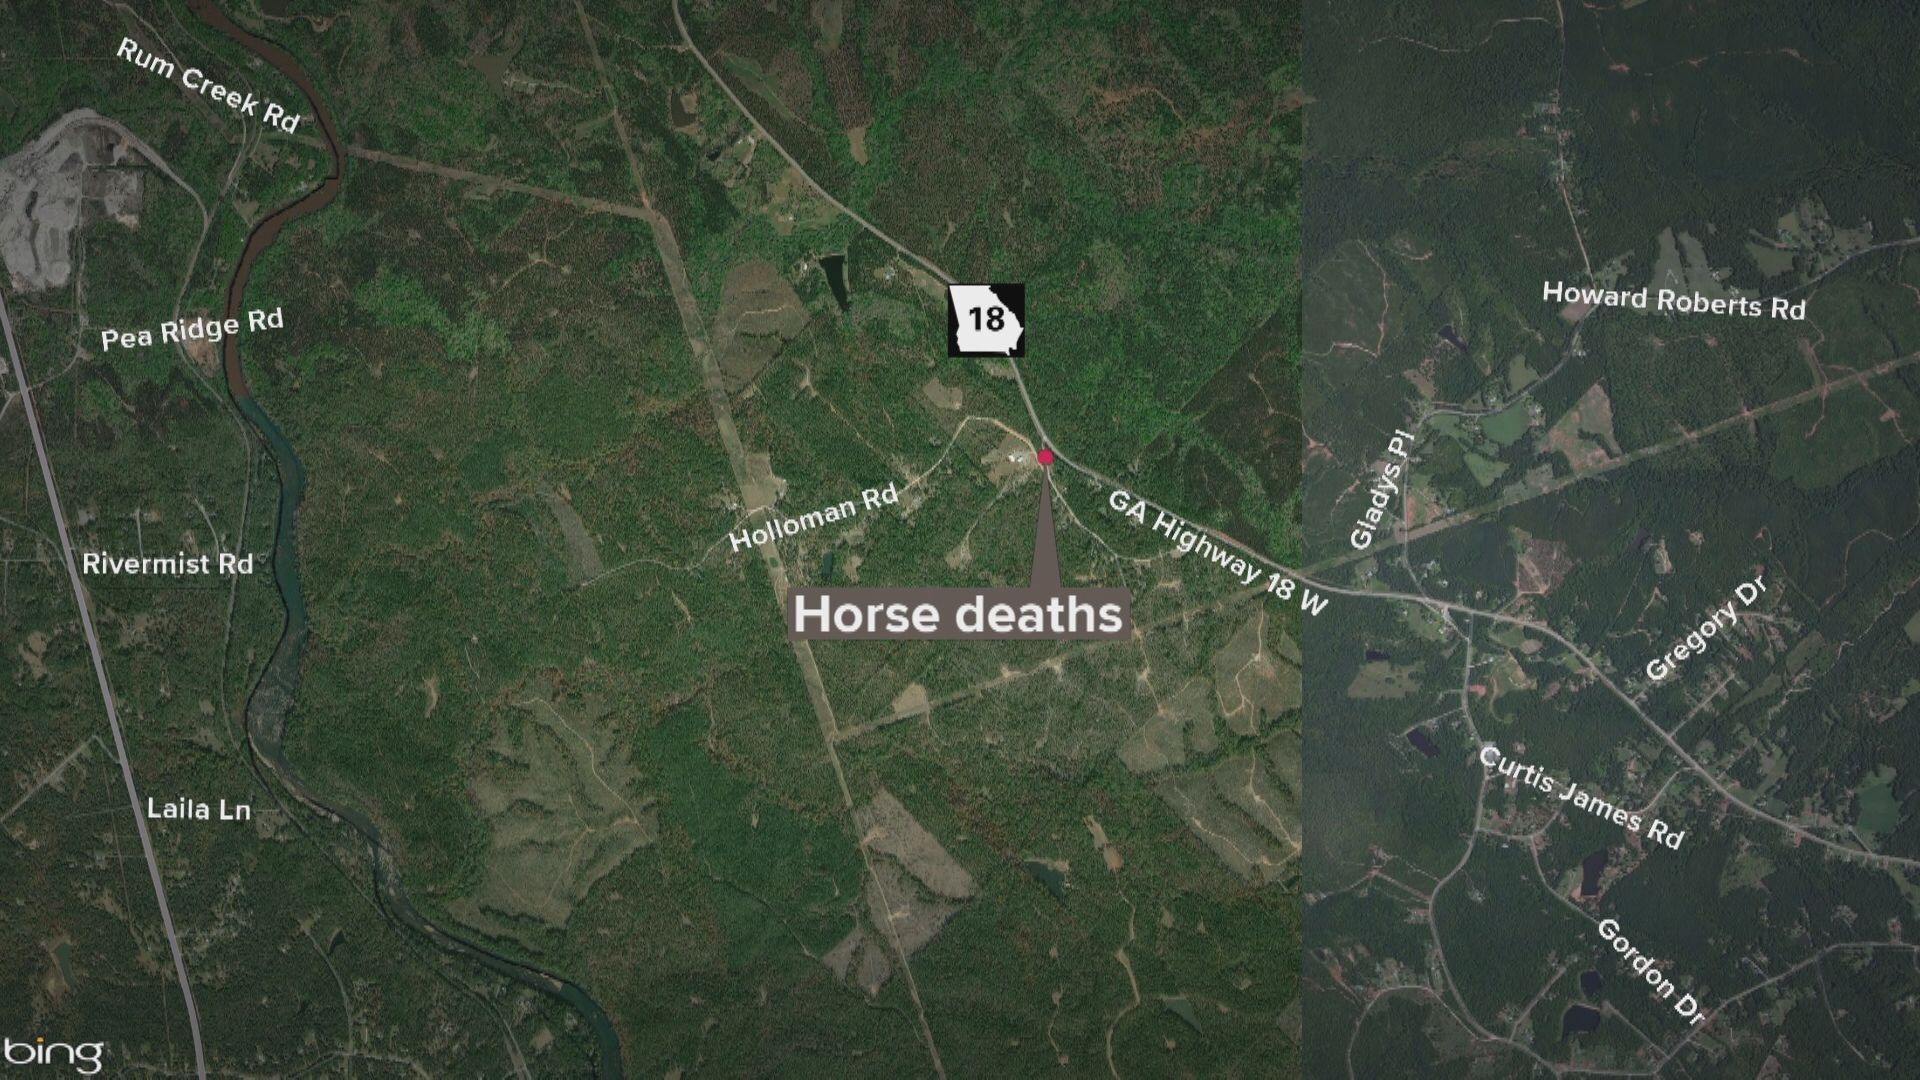 Jones County investigators are looking into the shooting deaths of two horses. According to Investigator John Simmons, it happened near Highway 18W around the Holloman Road area.